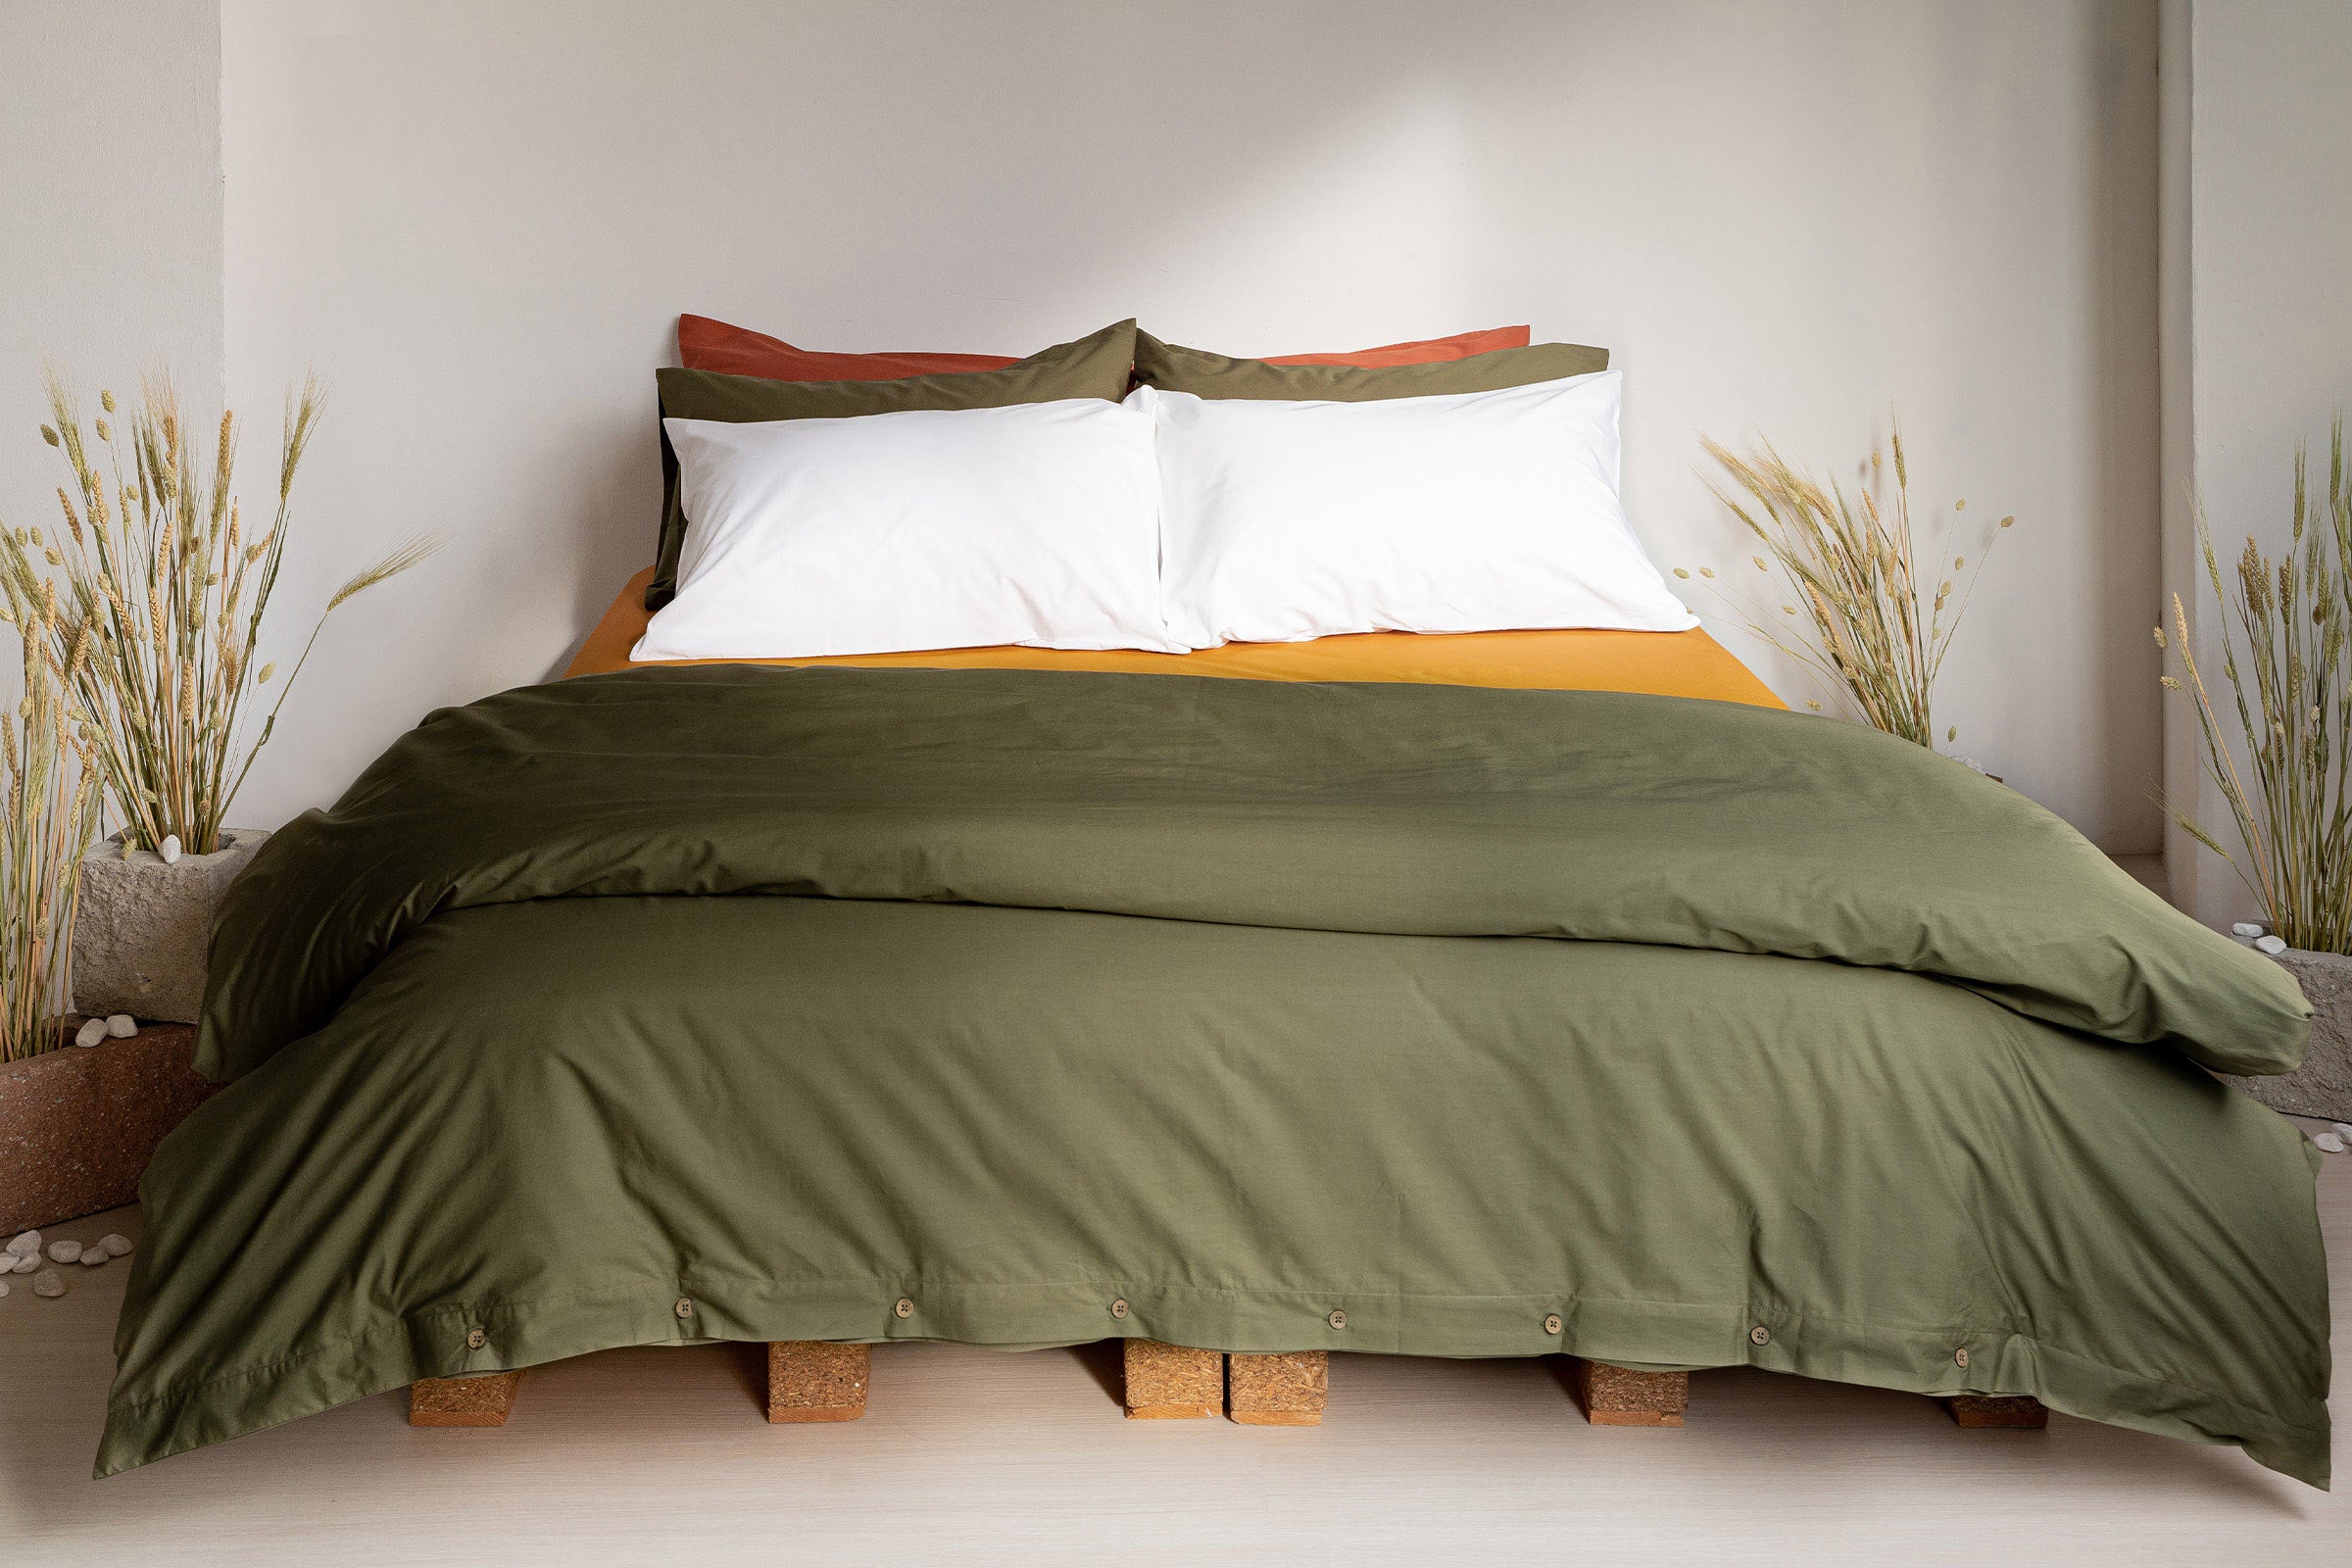 crisp-olive-duvet-cover-pillowcase-pair-mustard-fitted-sheet-white-pillowcase-pair-clay-body-pillow-by-sojao.jpg